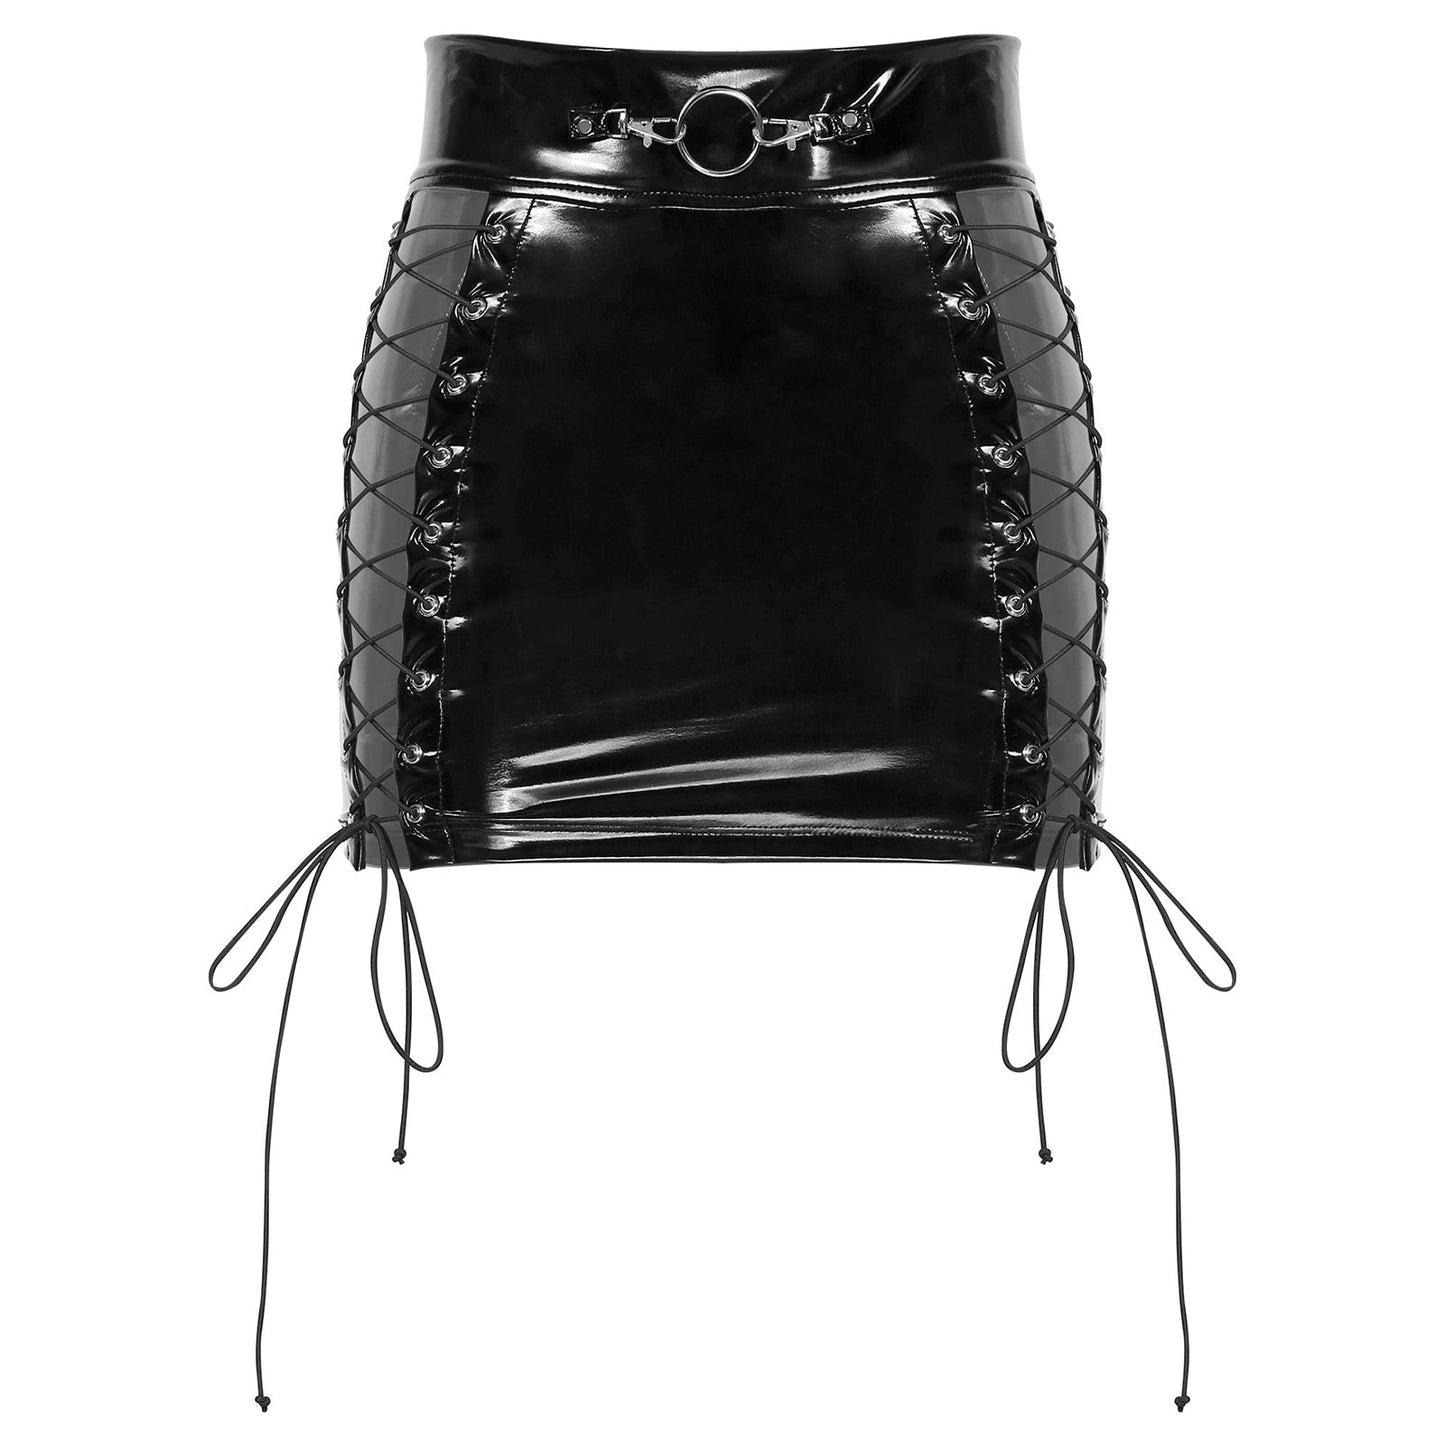 Lace Me Up Wetlook Skirt